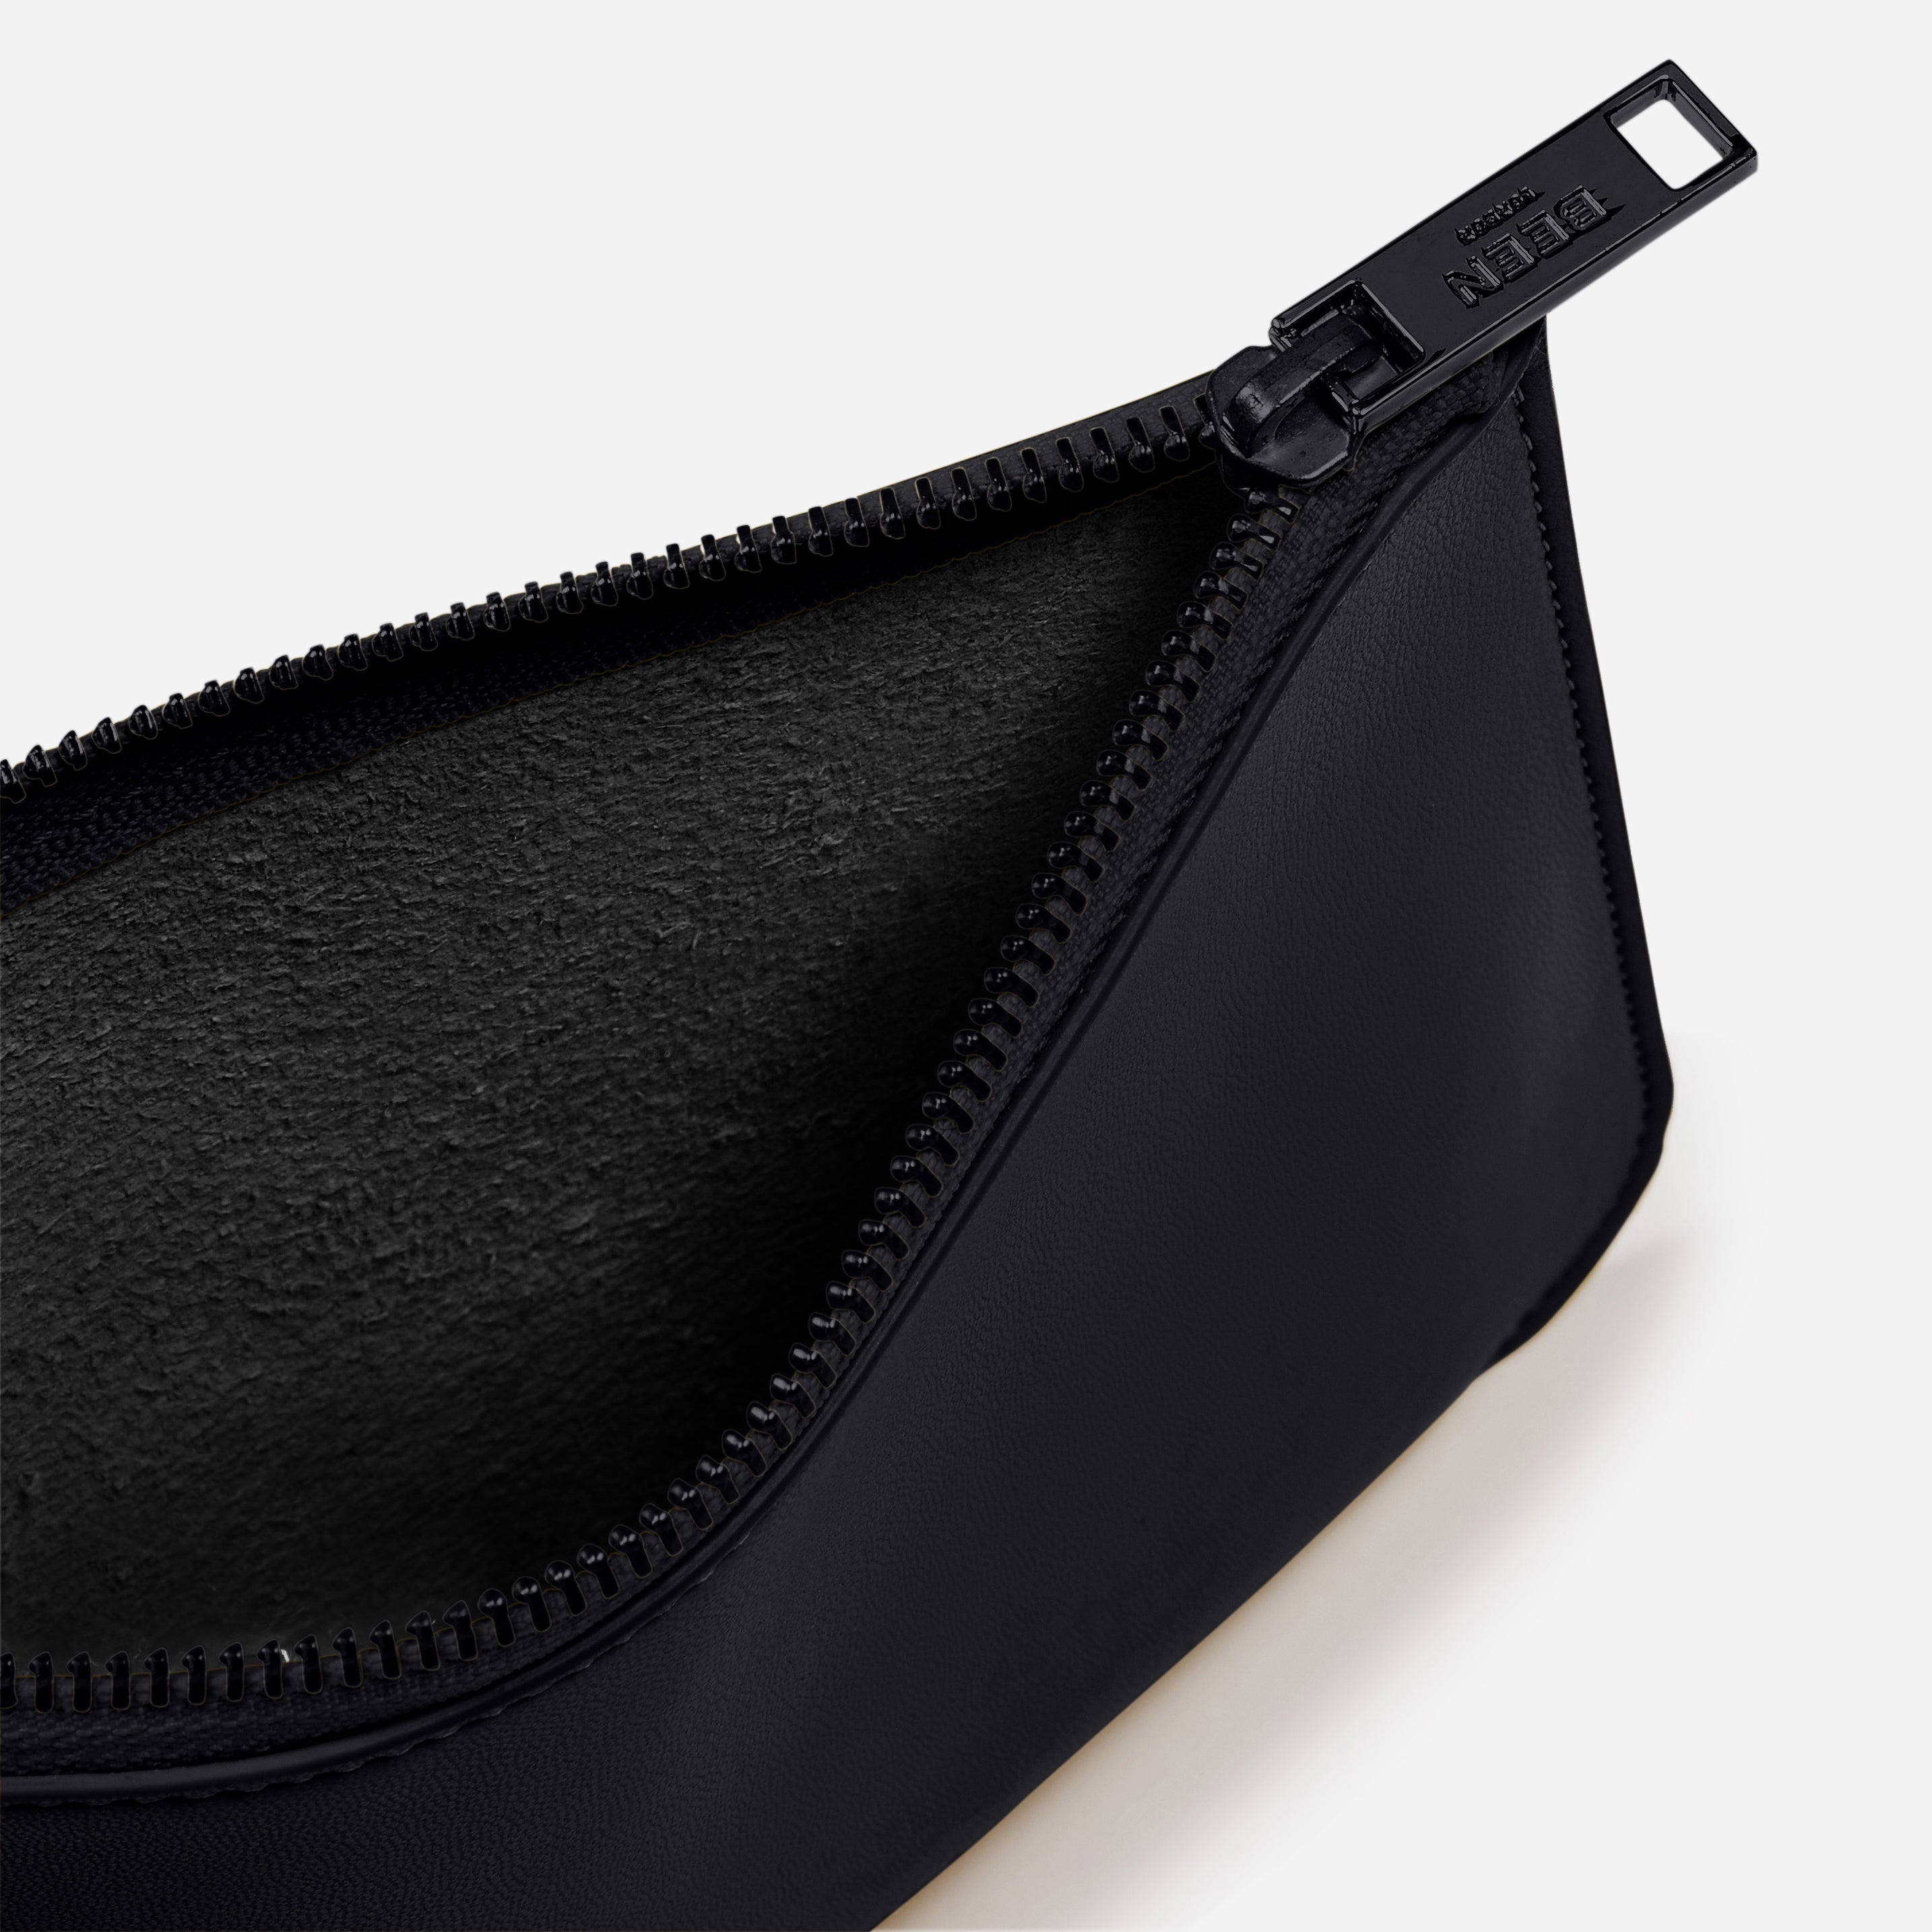 Daley Small Pouch in Black Onyx interior